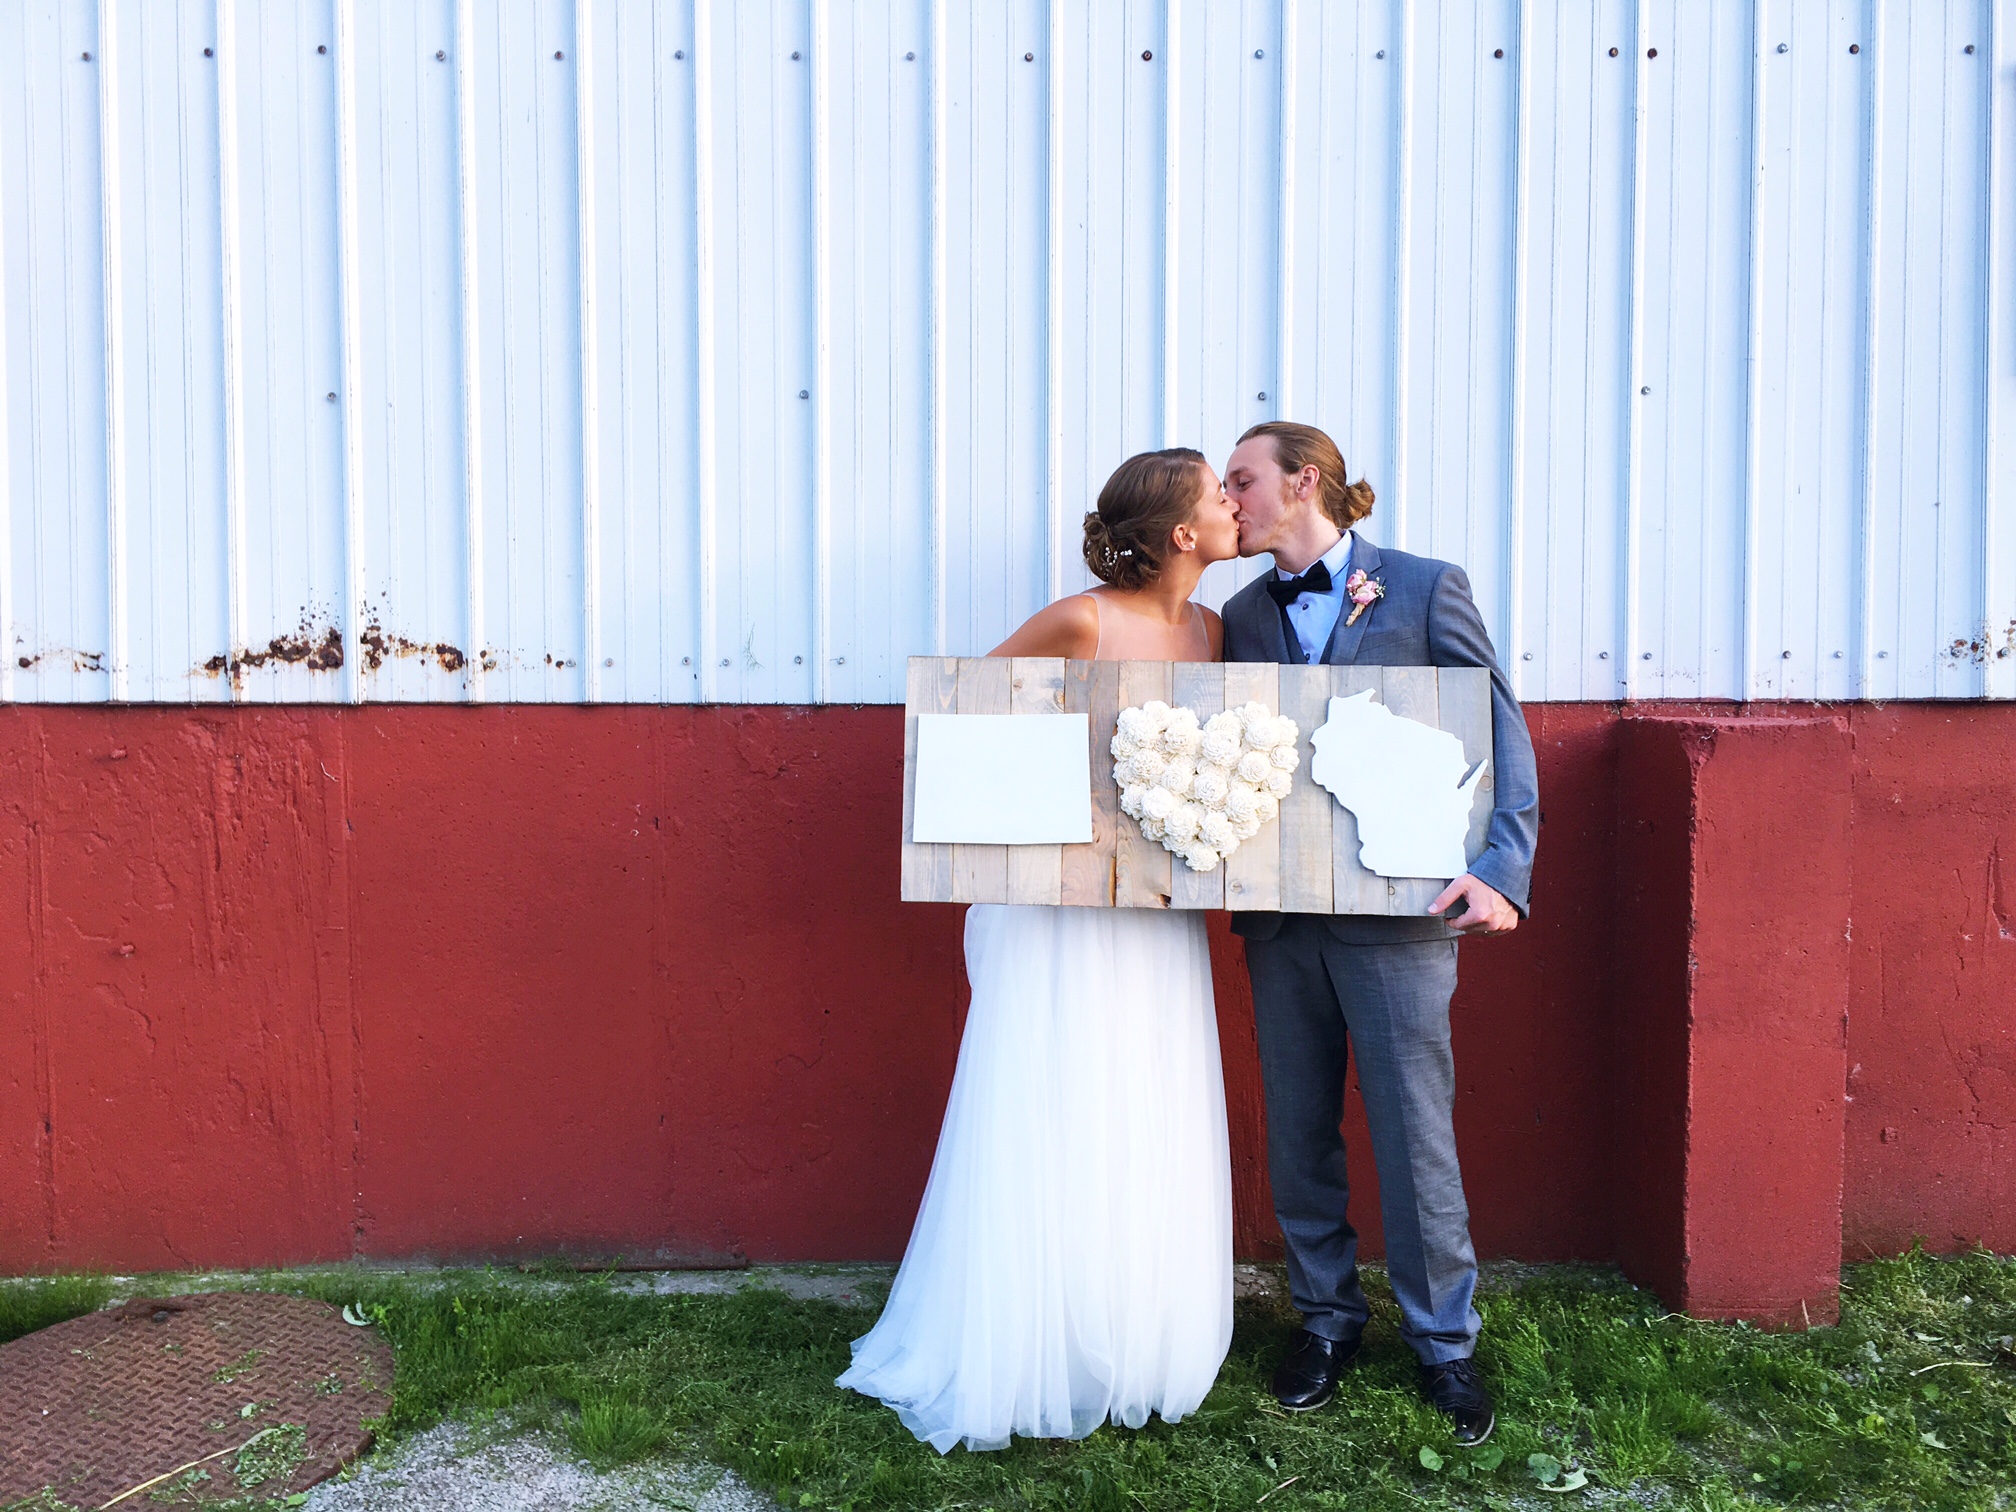 The Beauty of Marriage and a Rustic Barn Wedding